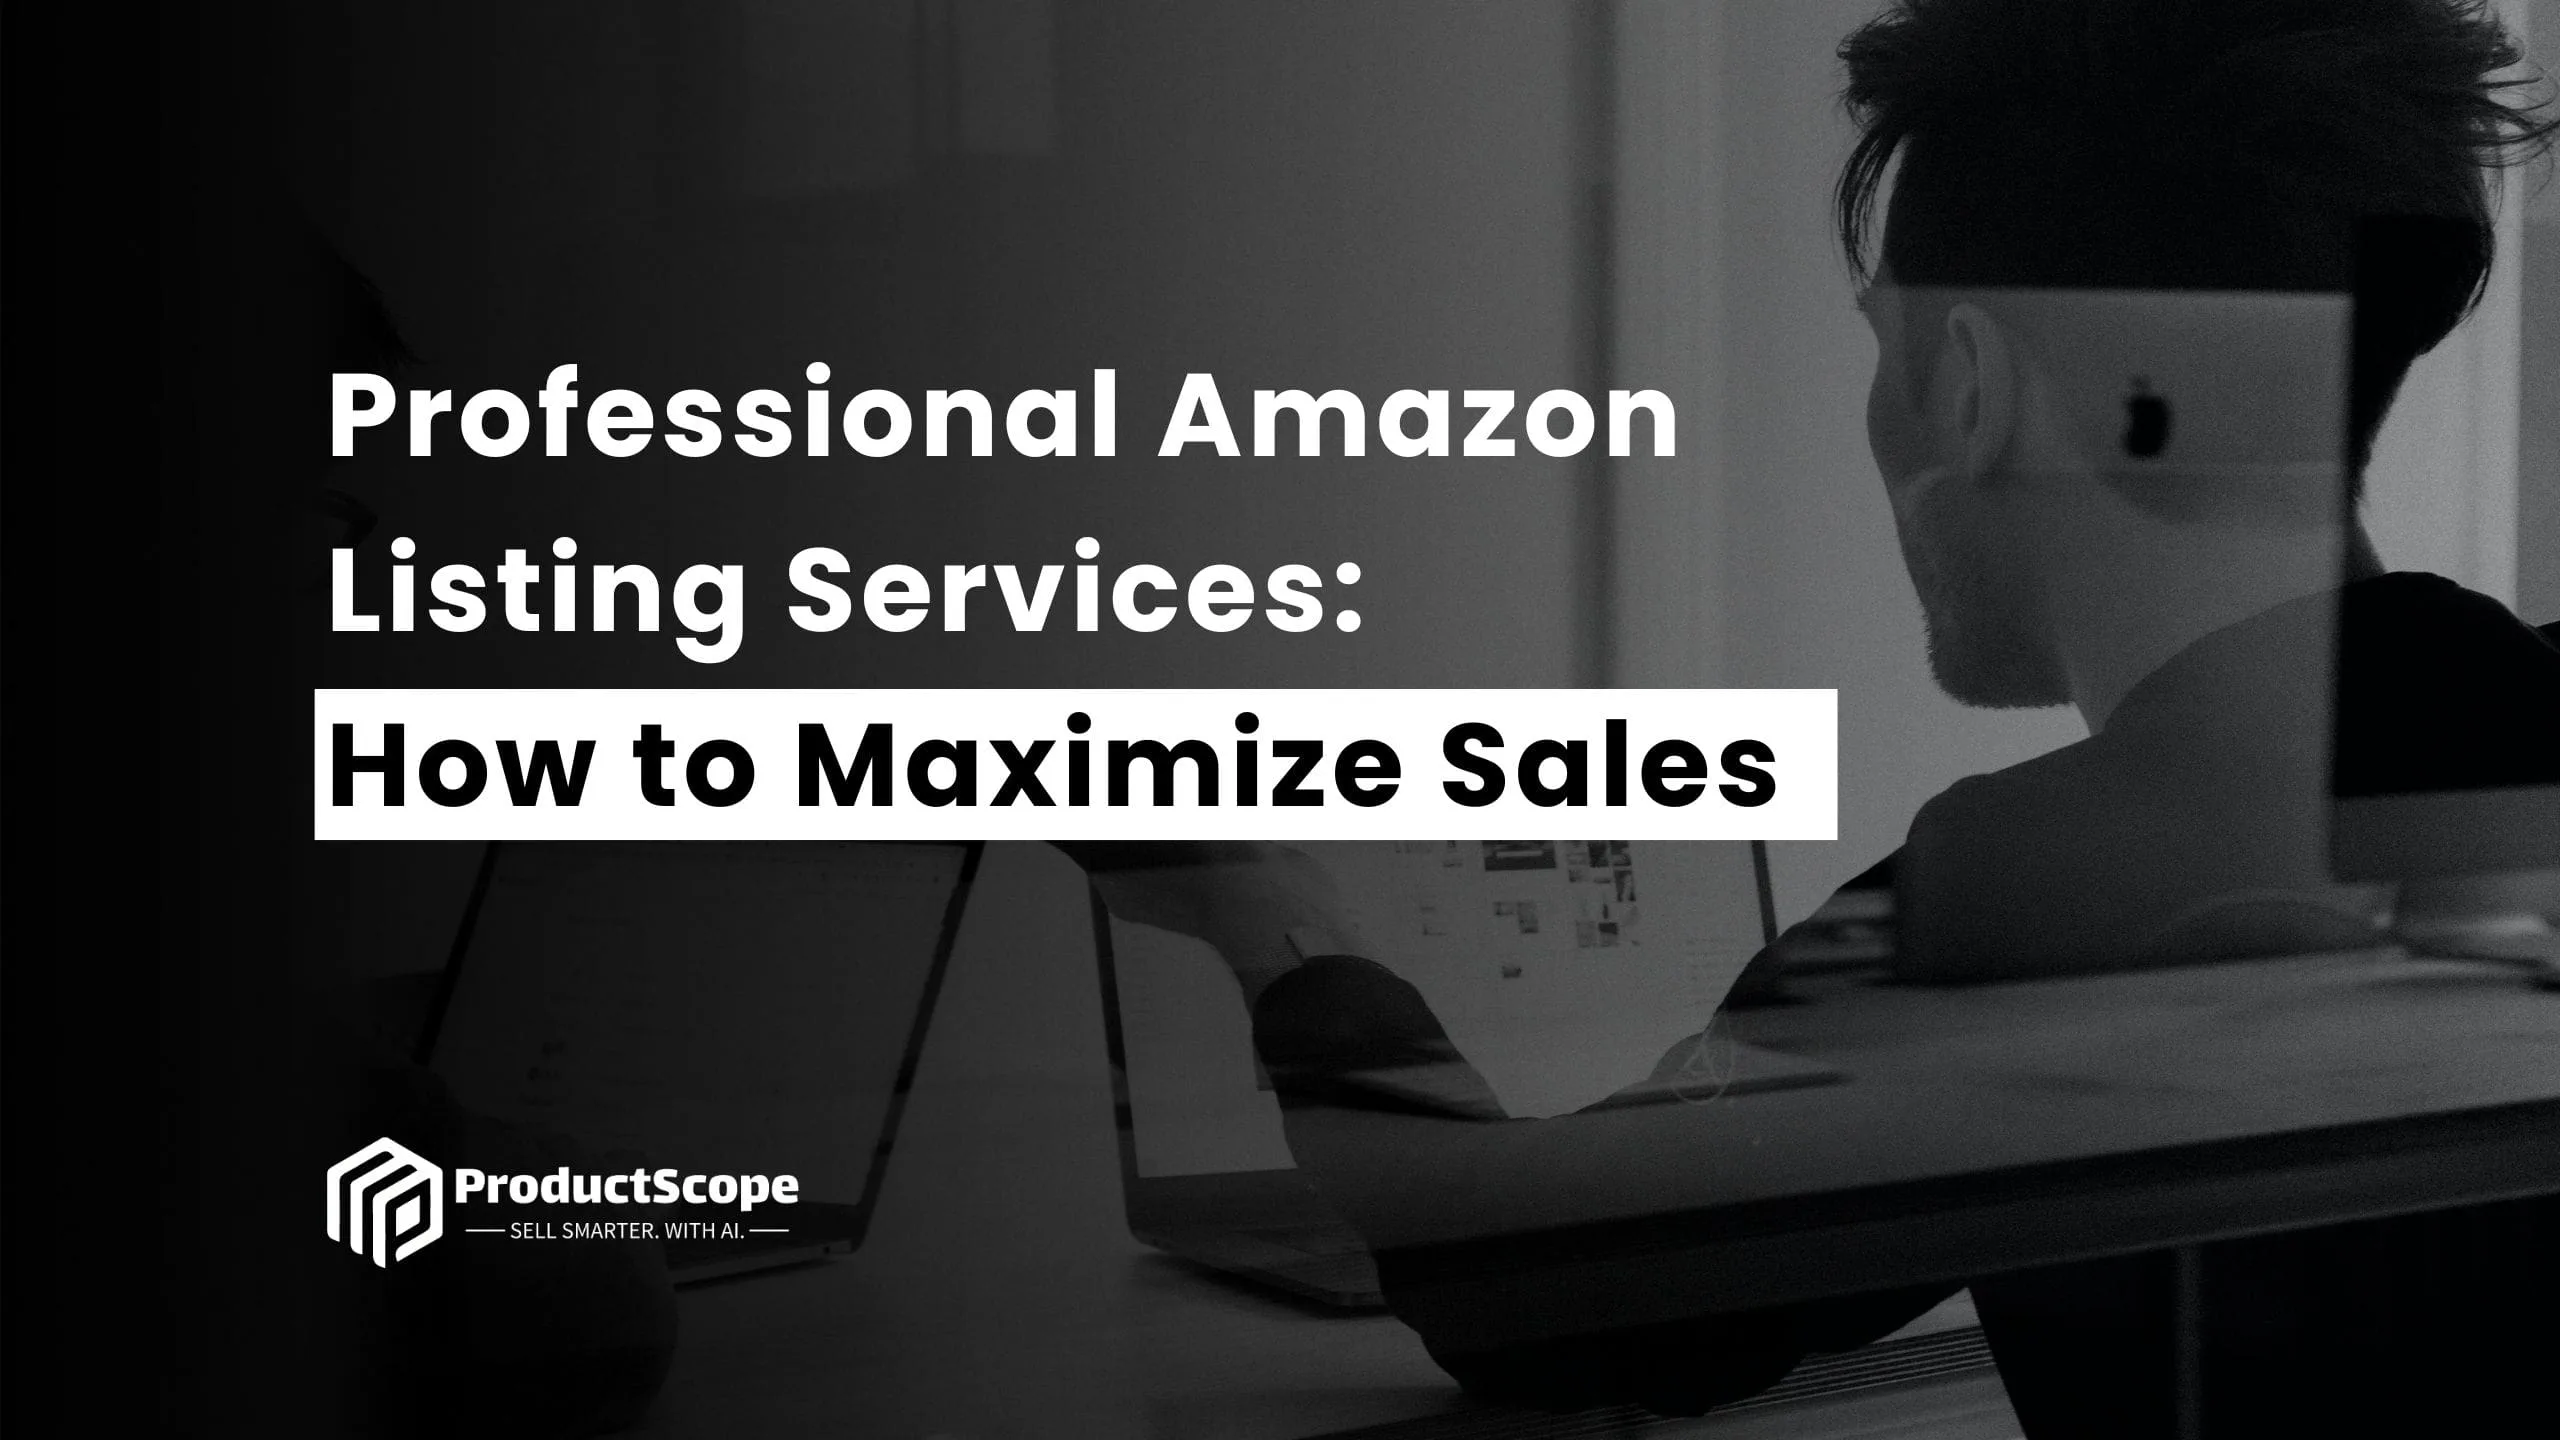 Professional Amazon Listing Services: How to Maximize Sales